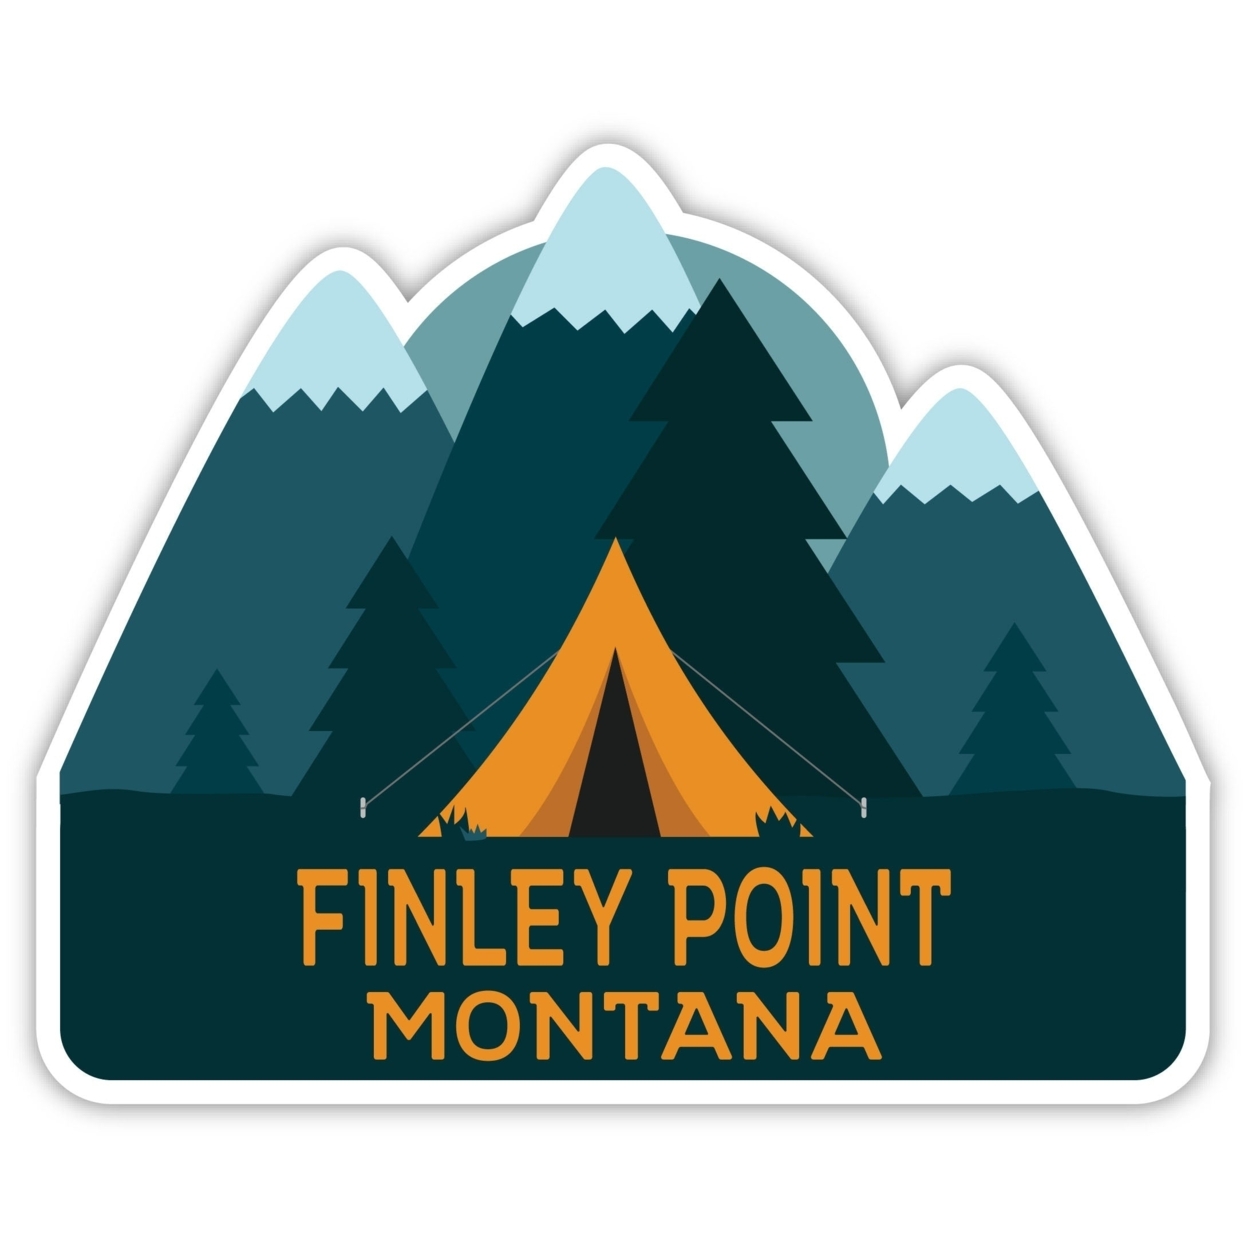 Finley Point Montana Souvenir Decorative Stickers (Choose Theme And Size) - 4-Pack, 12-Inch, Tent